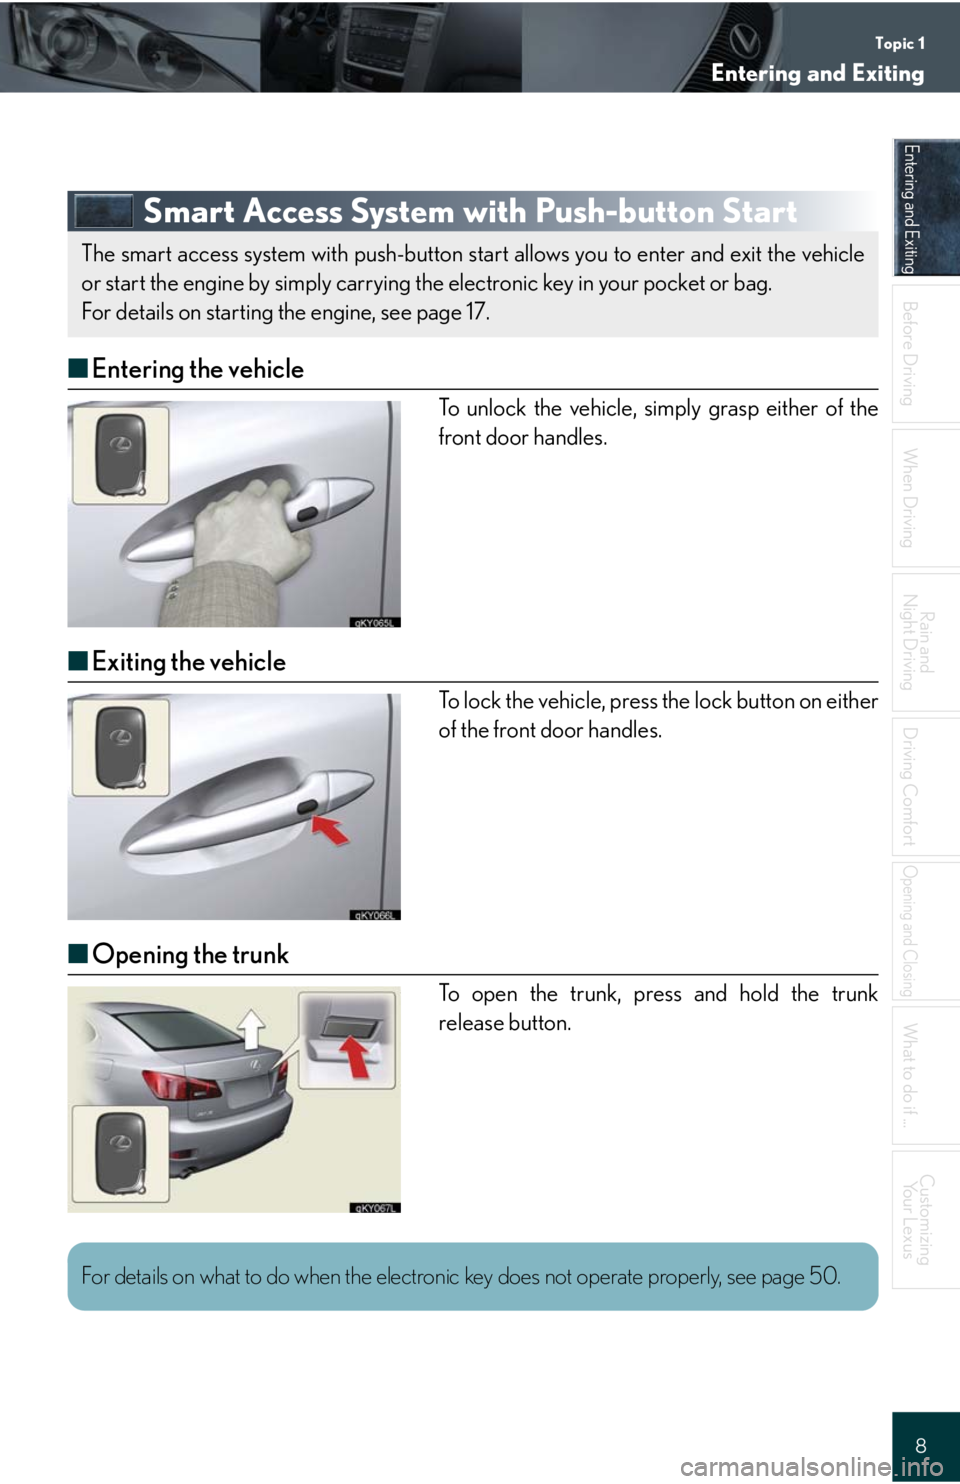 Lexus IS250 2008  Theft deterrent system / LEXUS 2008 IS 350/250 QUICK GUIDE OWNERS MANUAL (OM60D81U) Topic 1
Entering and Exiting
8
Entering and Exiting
When Driving
Rain and 
Night Driving
Driving Comfort
Opening and Closing
What to do if ...
Customizing
Yo u r  L e x u s
Before DrivingBefore Drivin